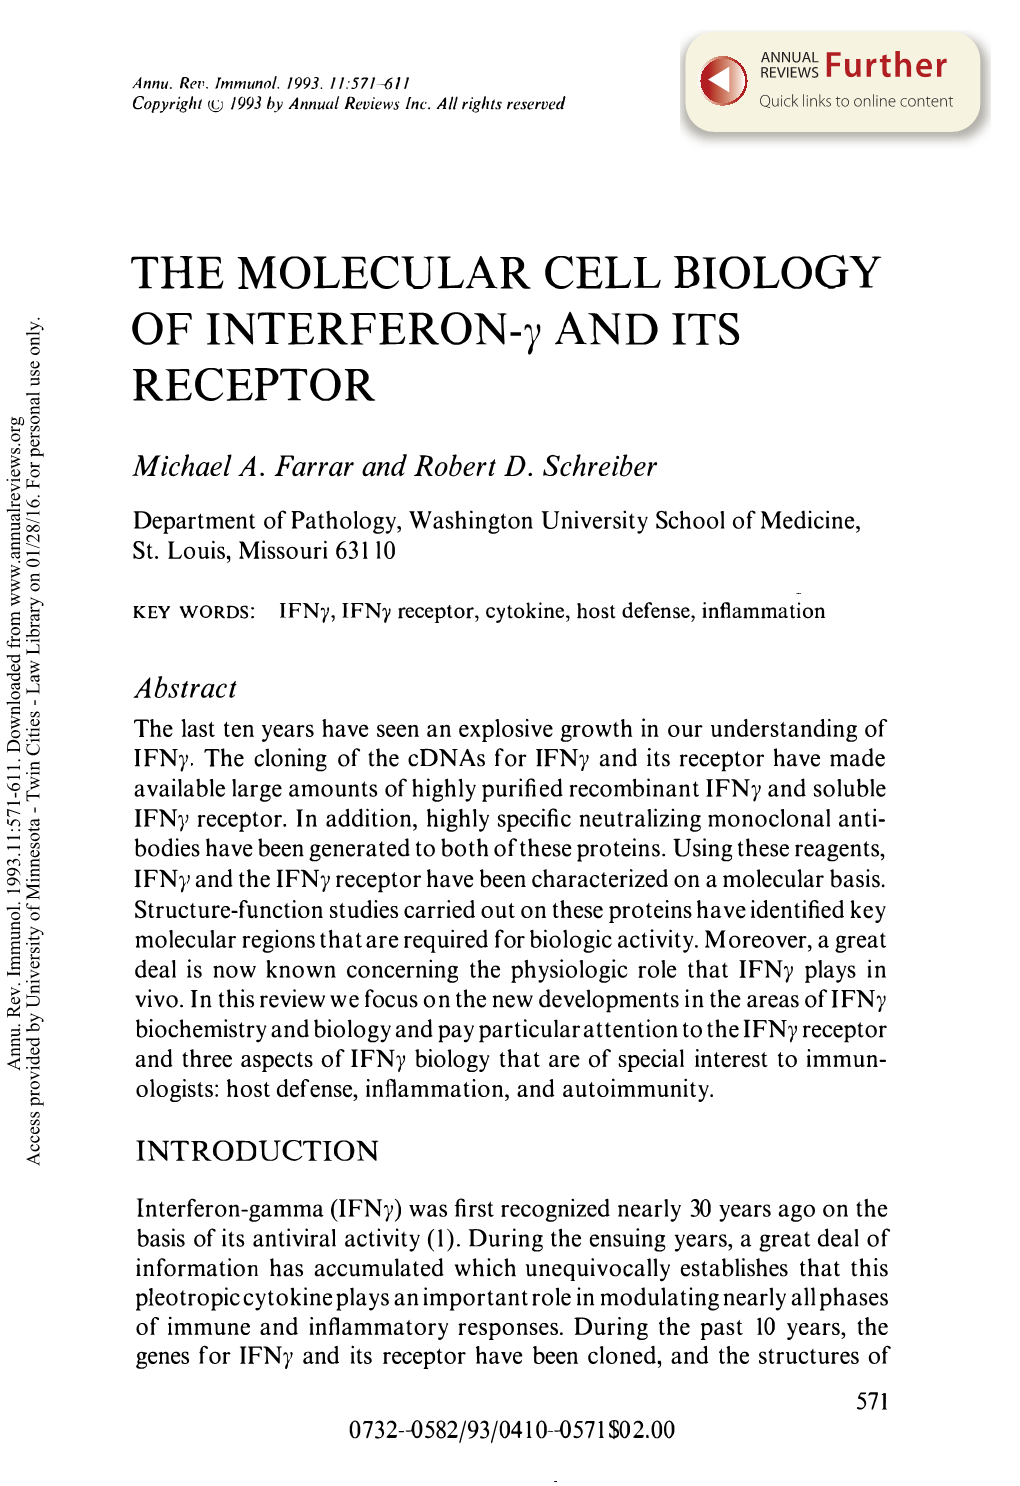 The Molecular Cell Biology of Interferon-Gamma and Its Receptor